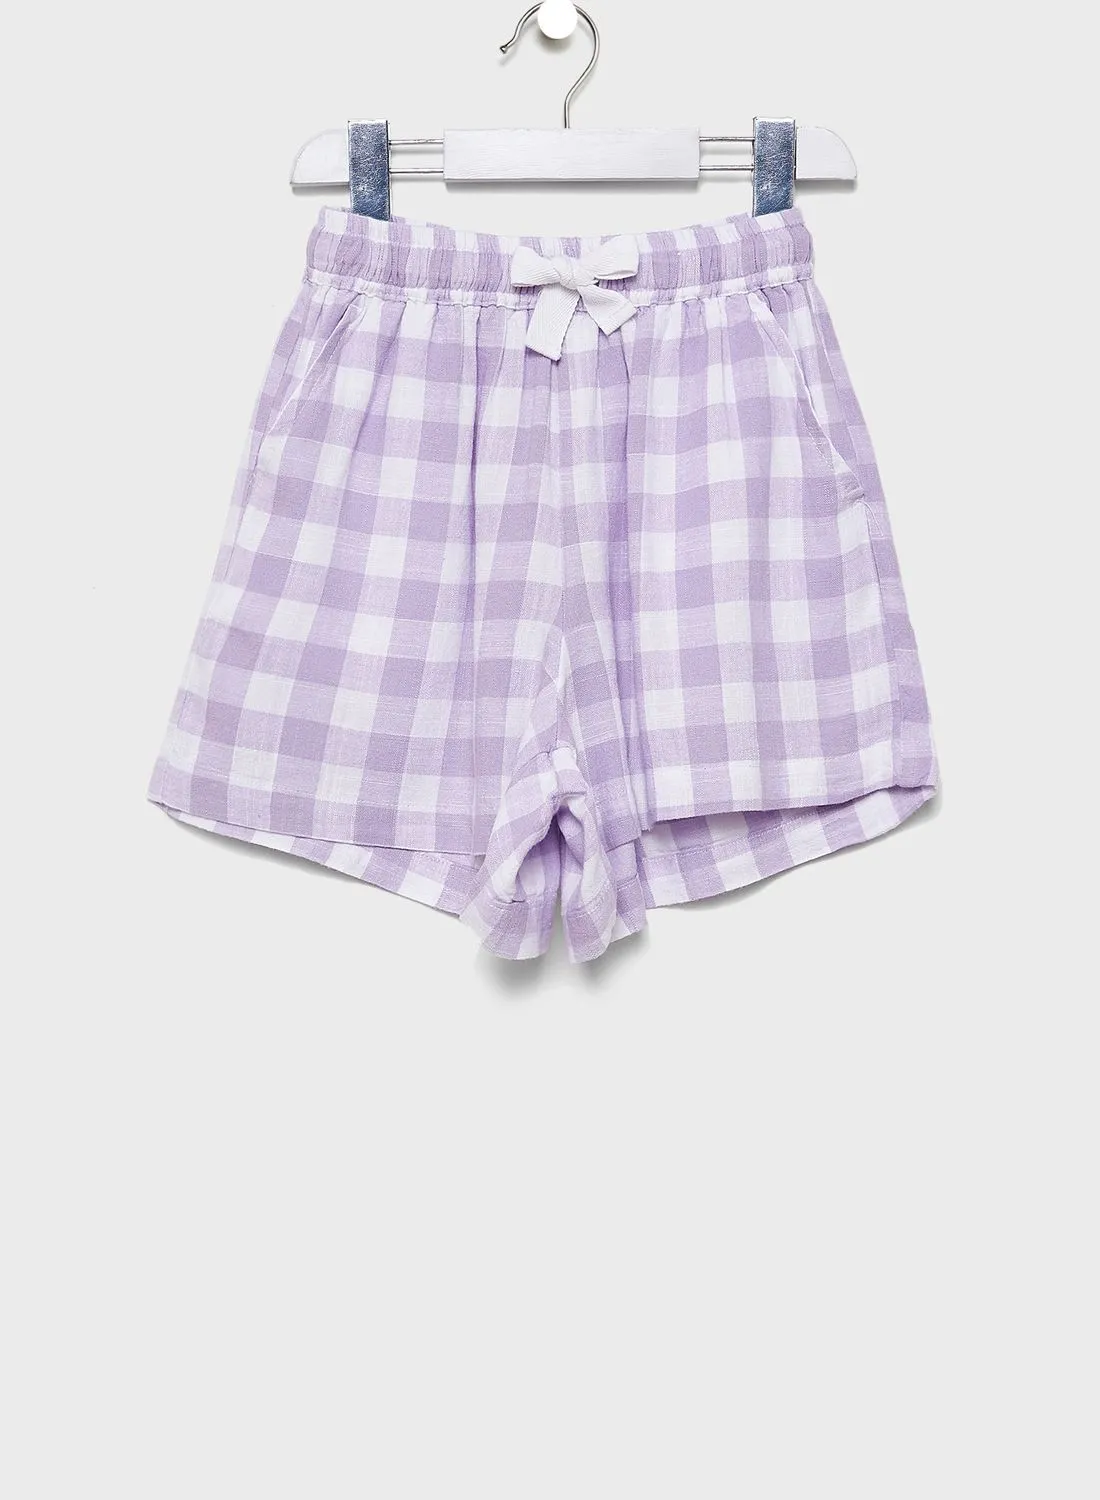 Cotton On Kids Gingham Shorts